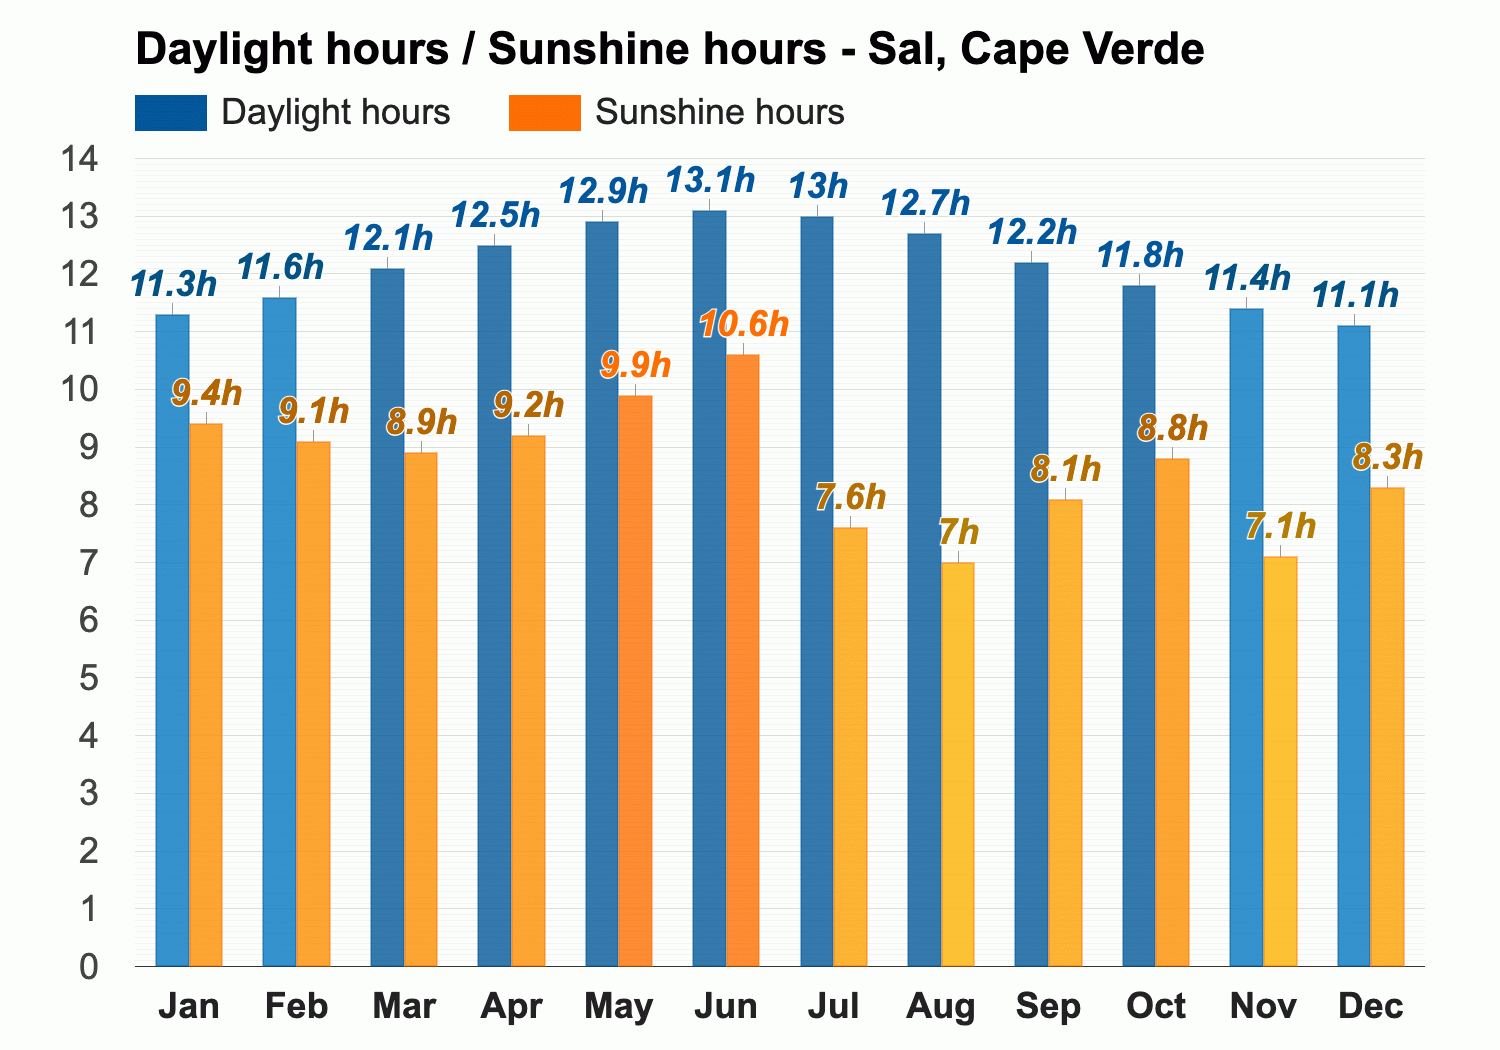 Sal, Cape Verde - May weather forecast and climate information | Weather  Atlas